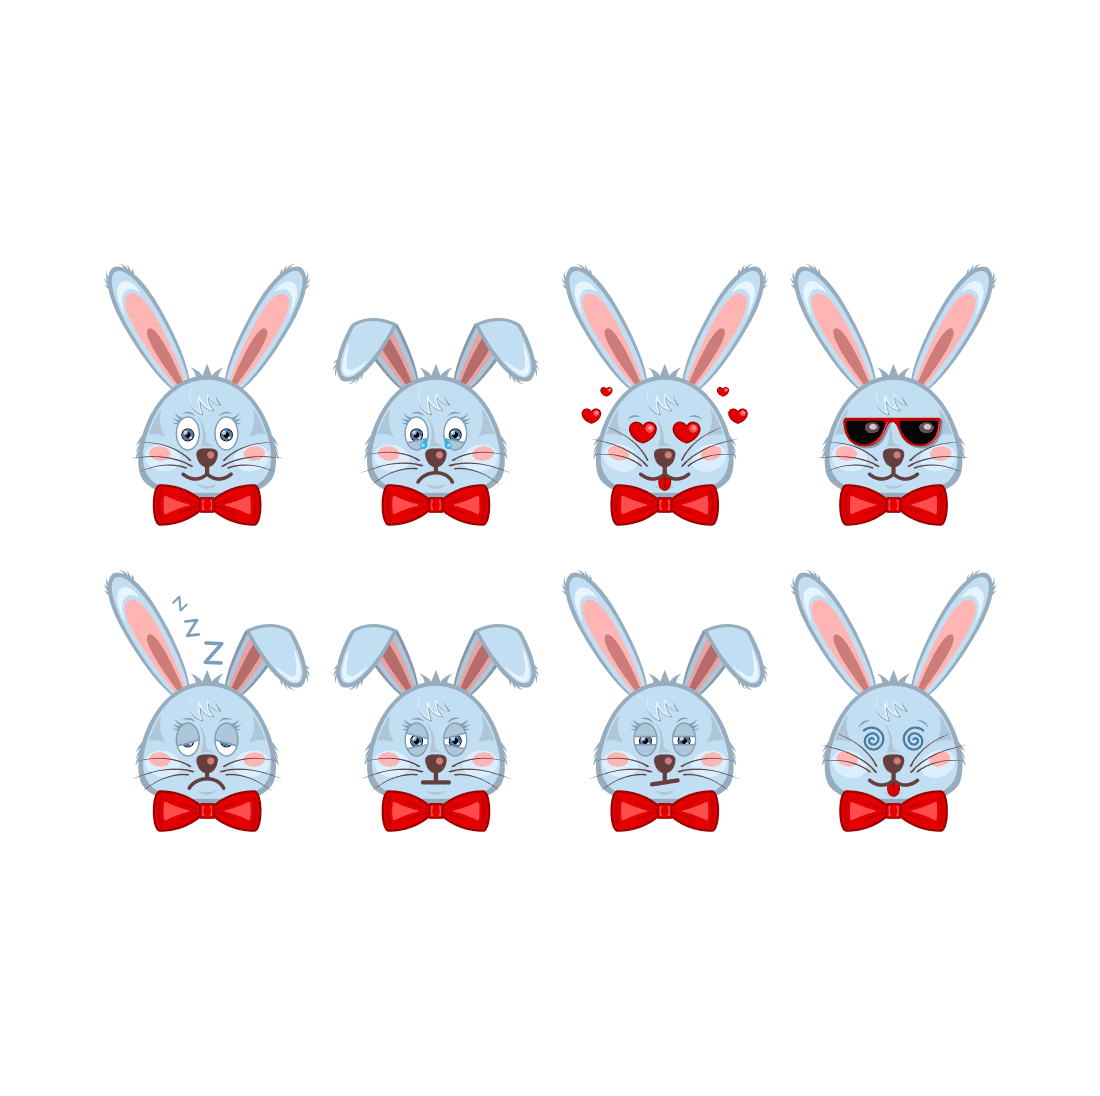 Set of six stickers of a rabbit wearing sunglasses and a bow tie.